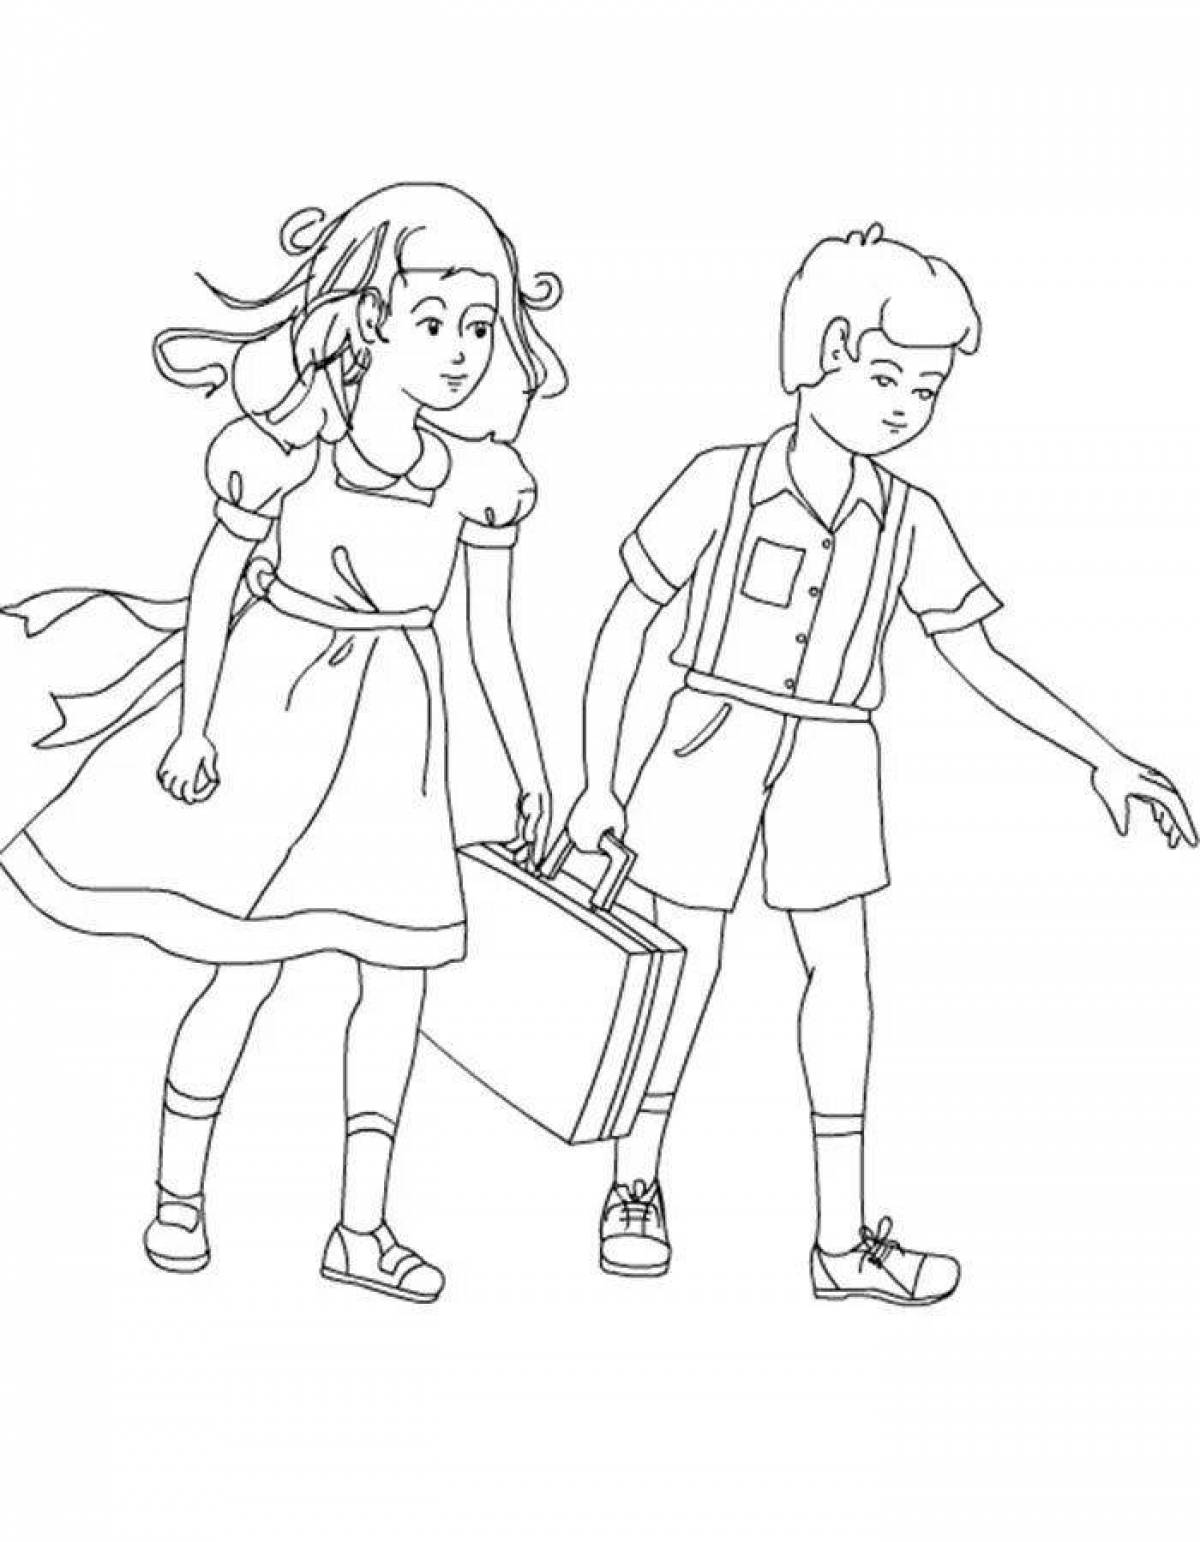 Coloring page charming schoolgirl